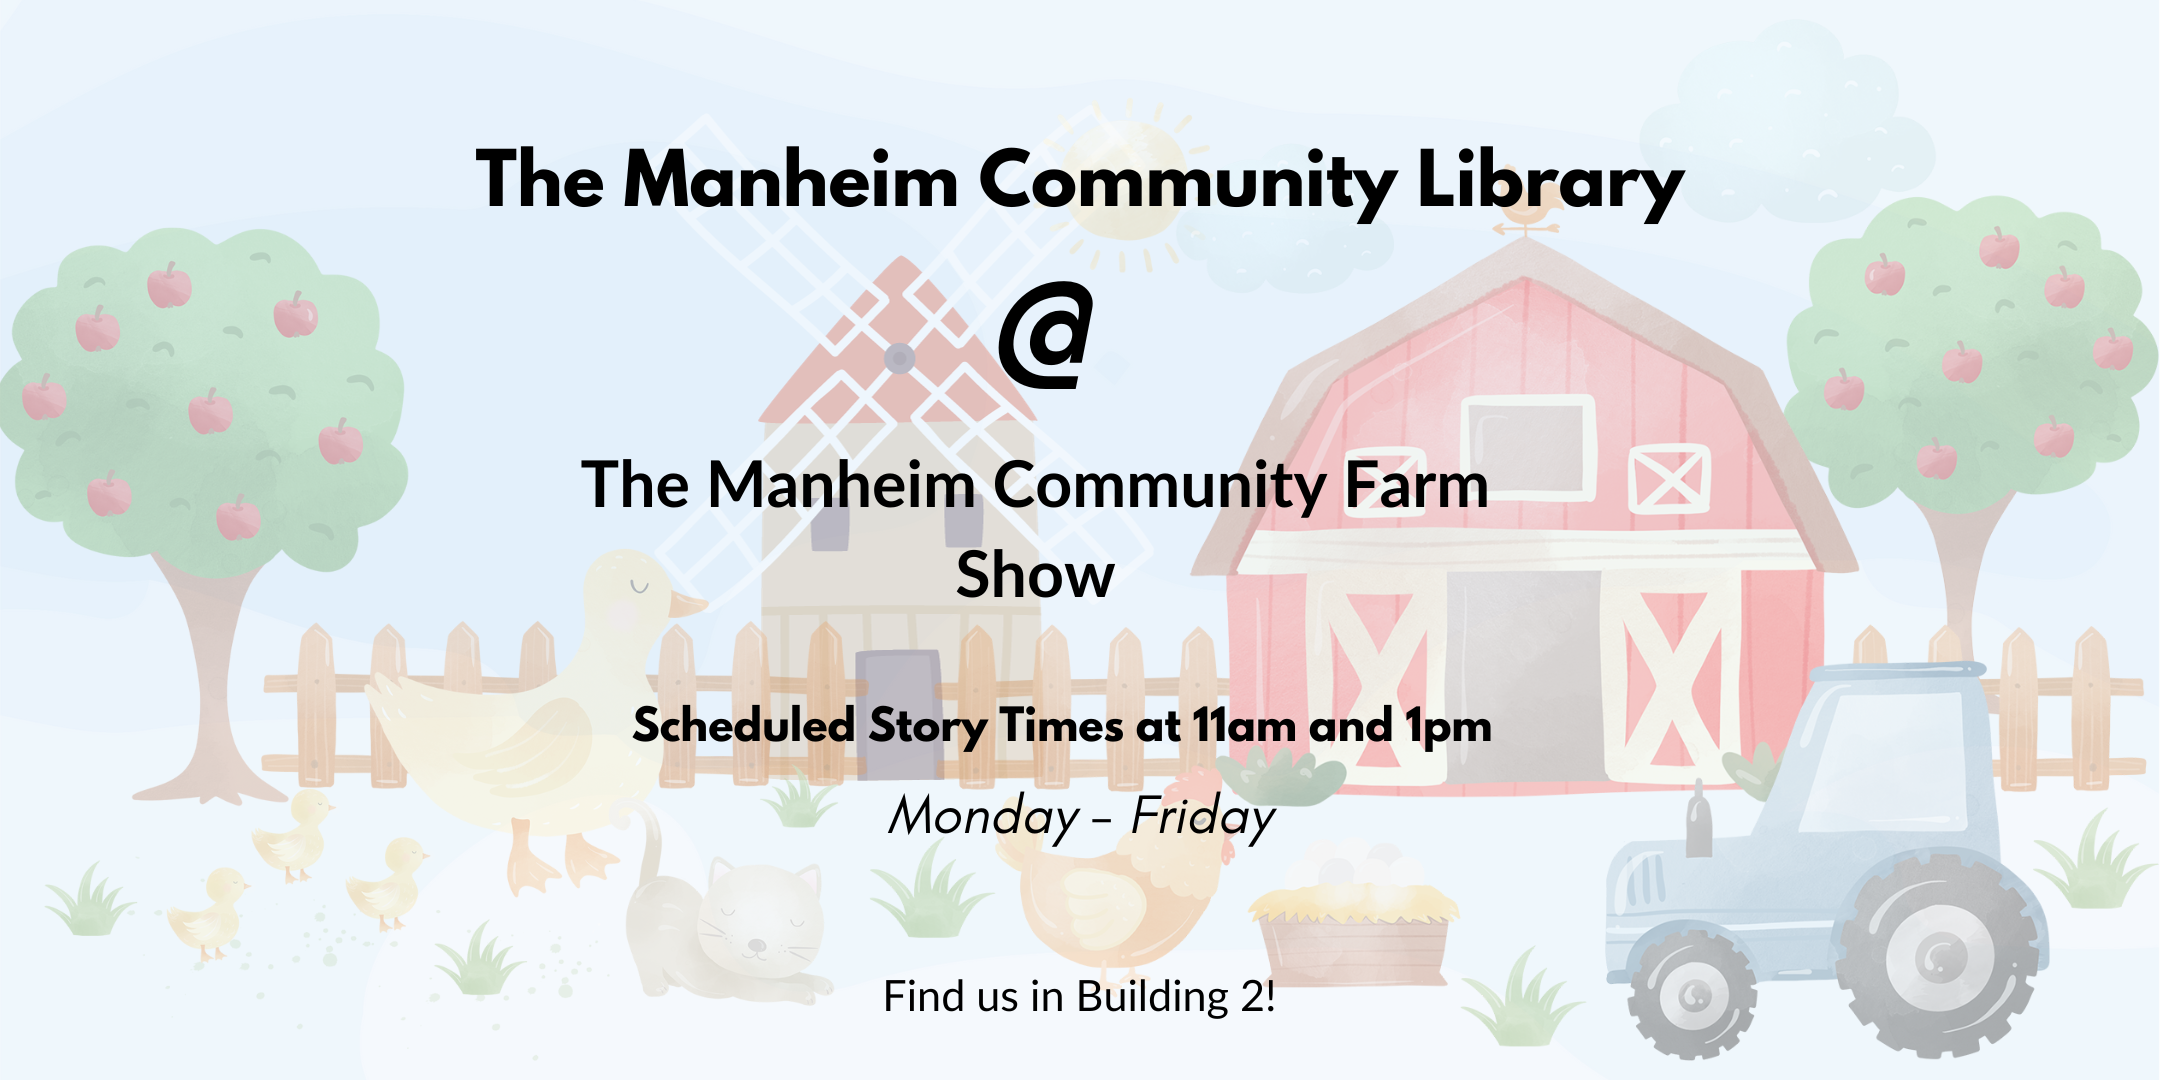 Manheim Community Library at the Manheim Community Farm Show. Story times at 11am and 1pm Monday through Friday October 9-13. You can find us in Building 2.